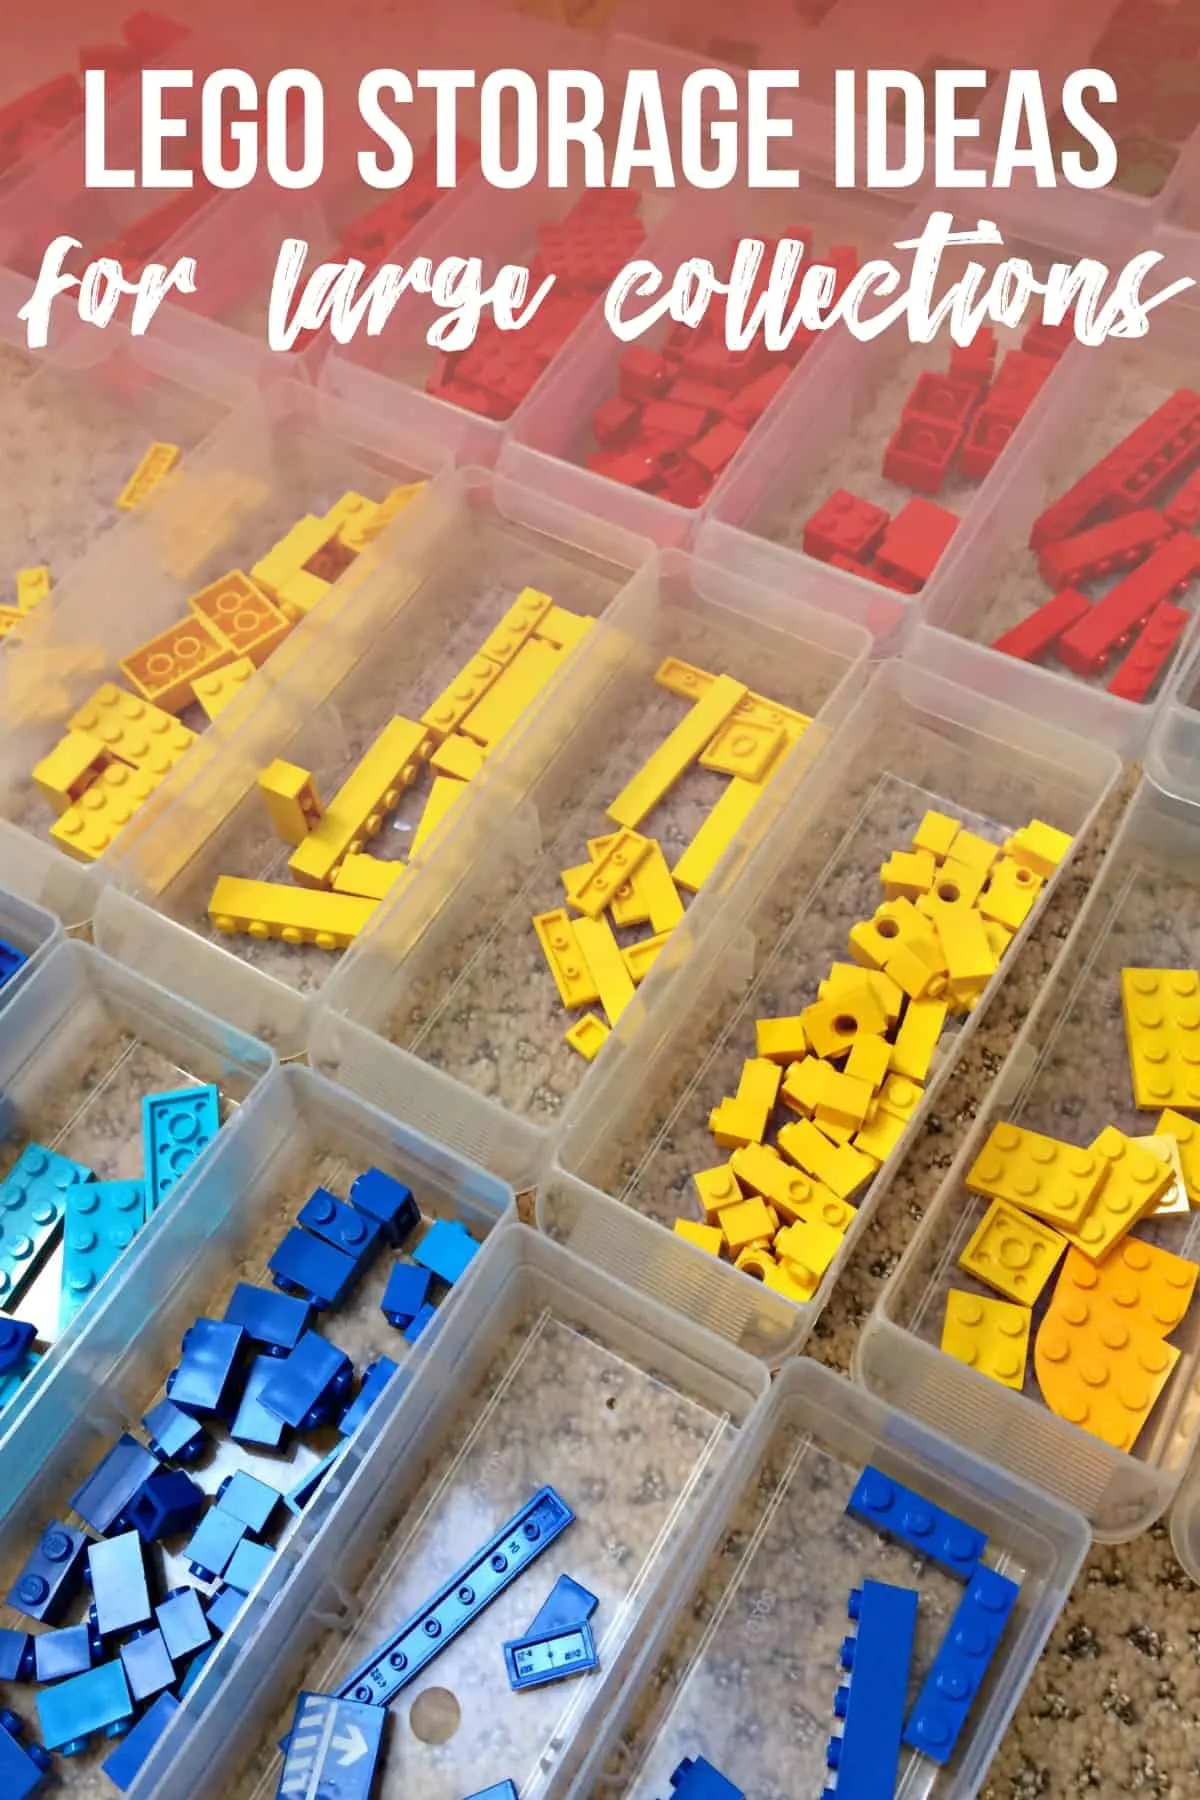 Building a Lego sorter to sort lego by size. 